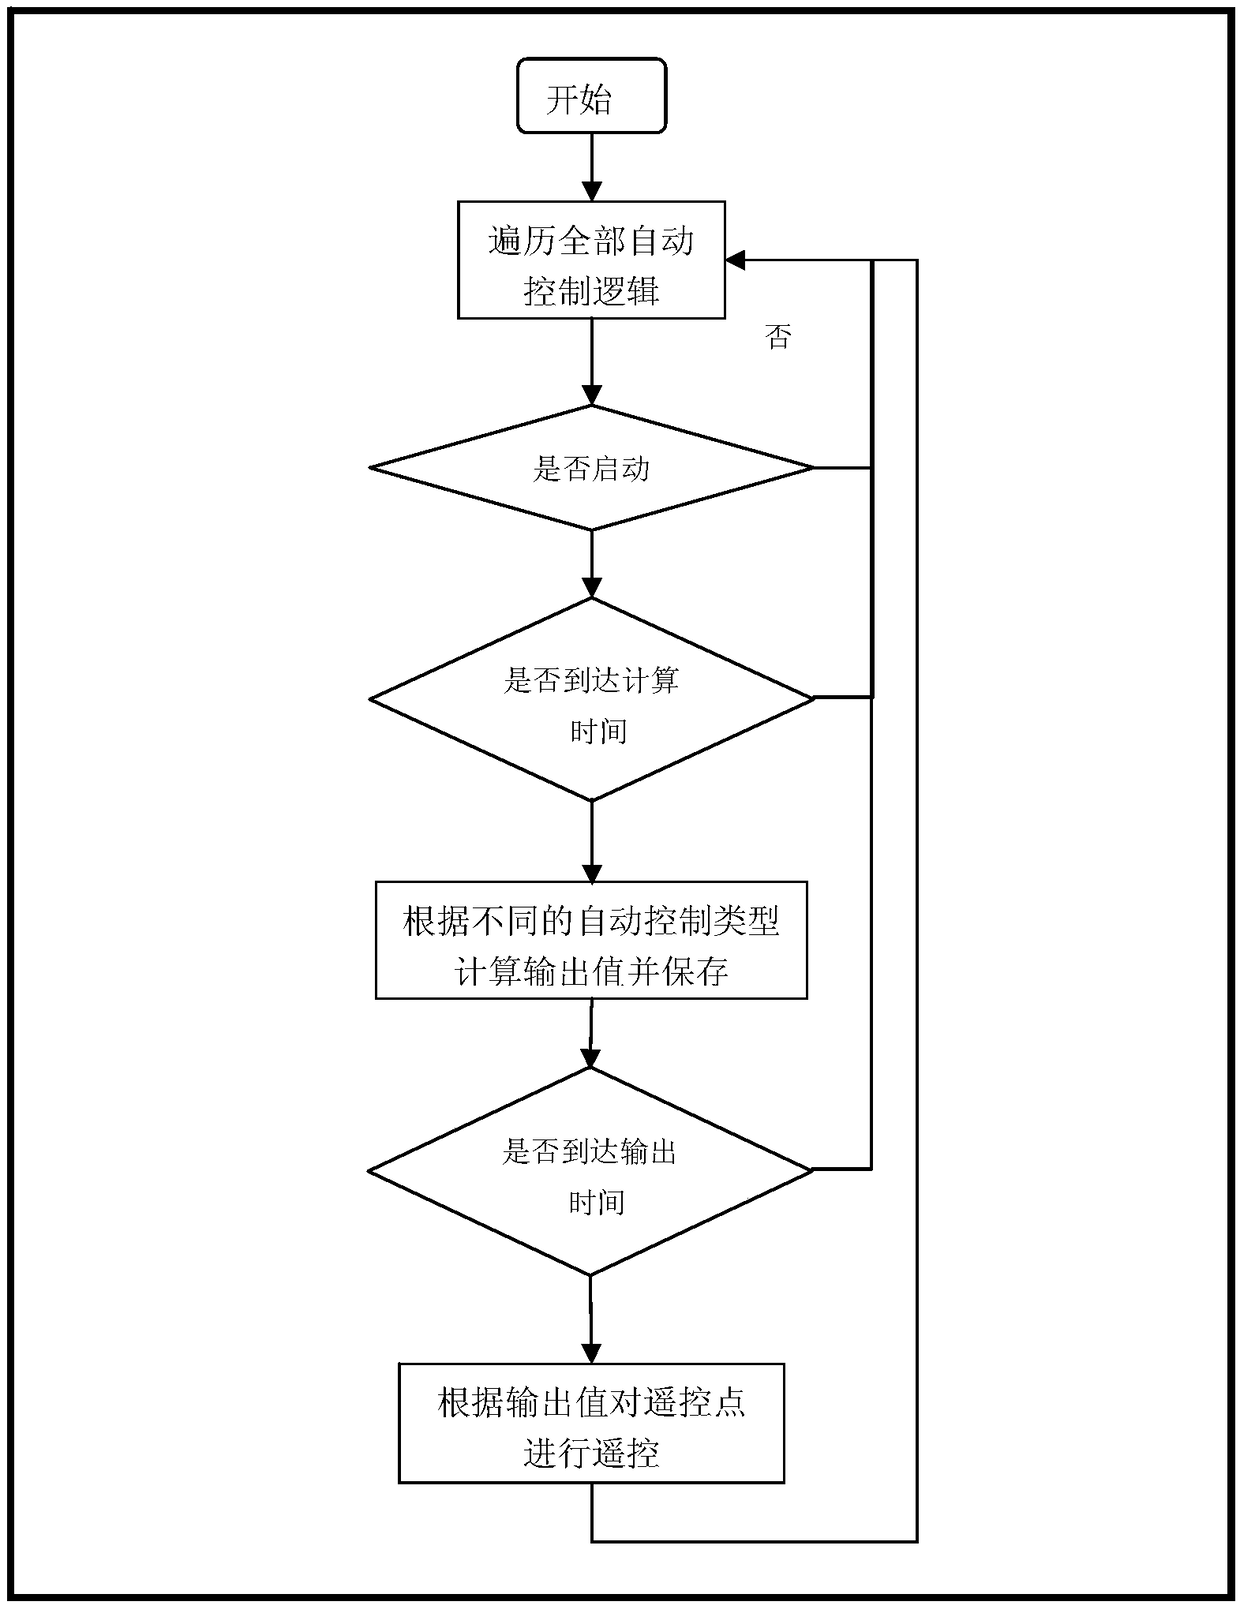 Method for realizing automatic adjustment of BAS professional equipment of integrated monitoring system